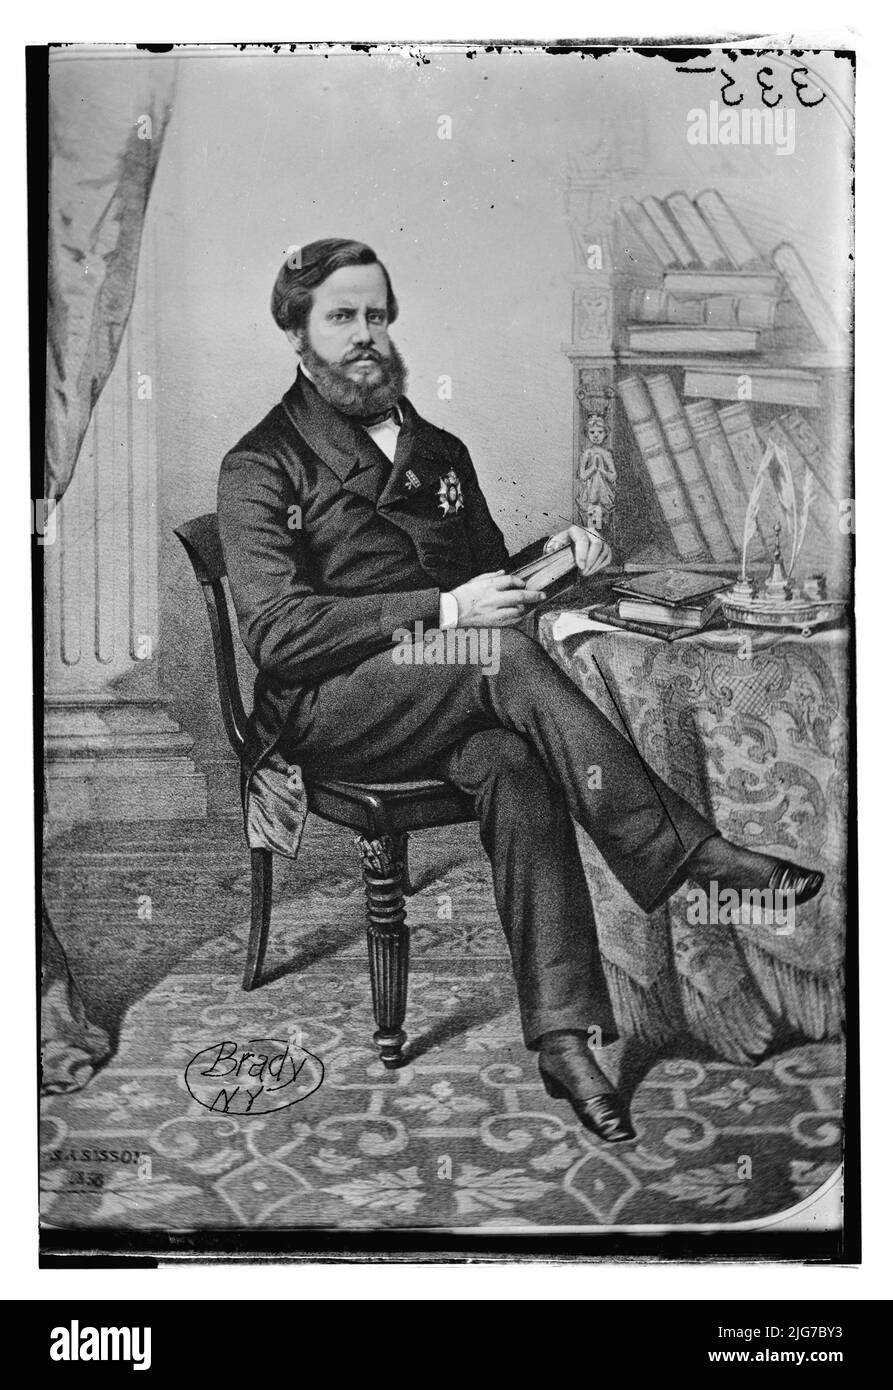 Don Pedro II, Emporor of Brazil, between 1855 and 1865. [Last monarch of the Empire of Brazil]. Stock Photo